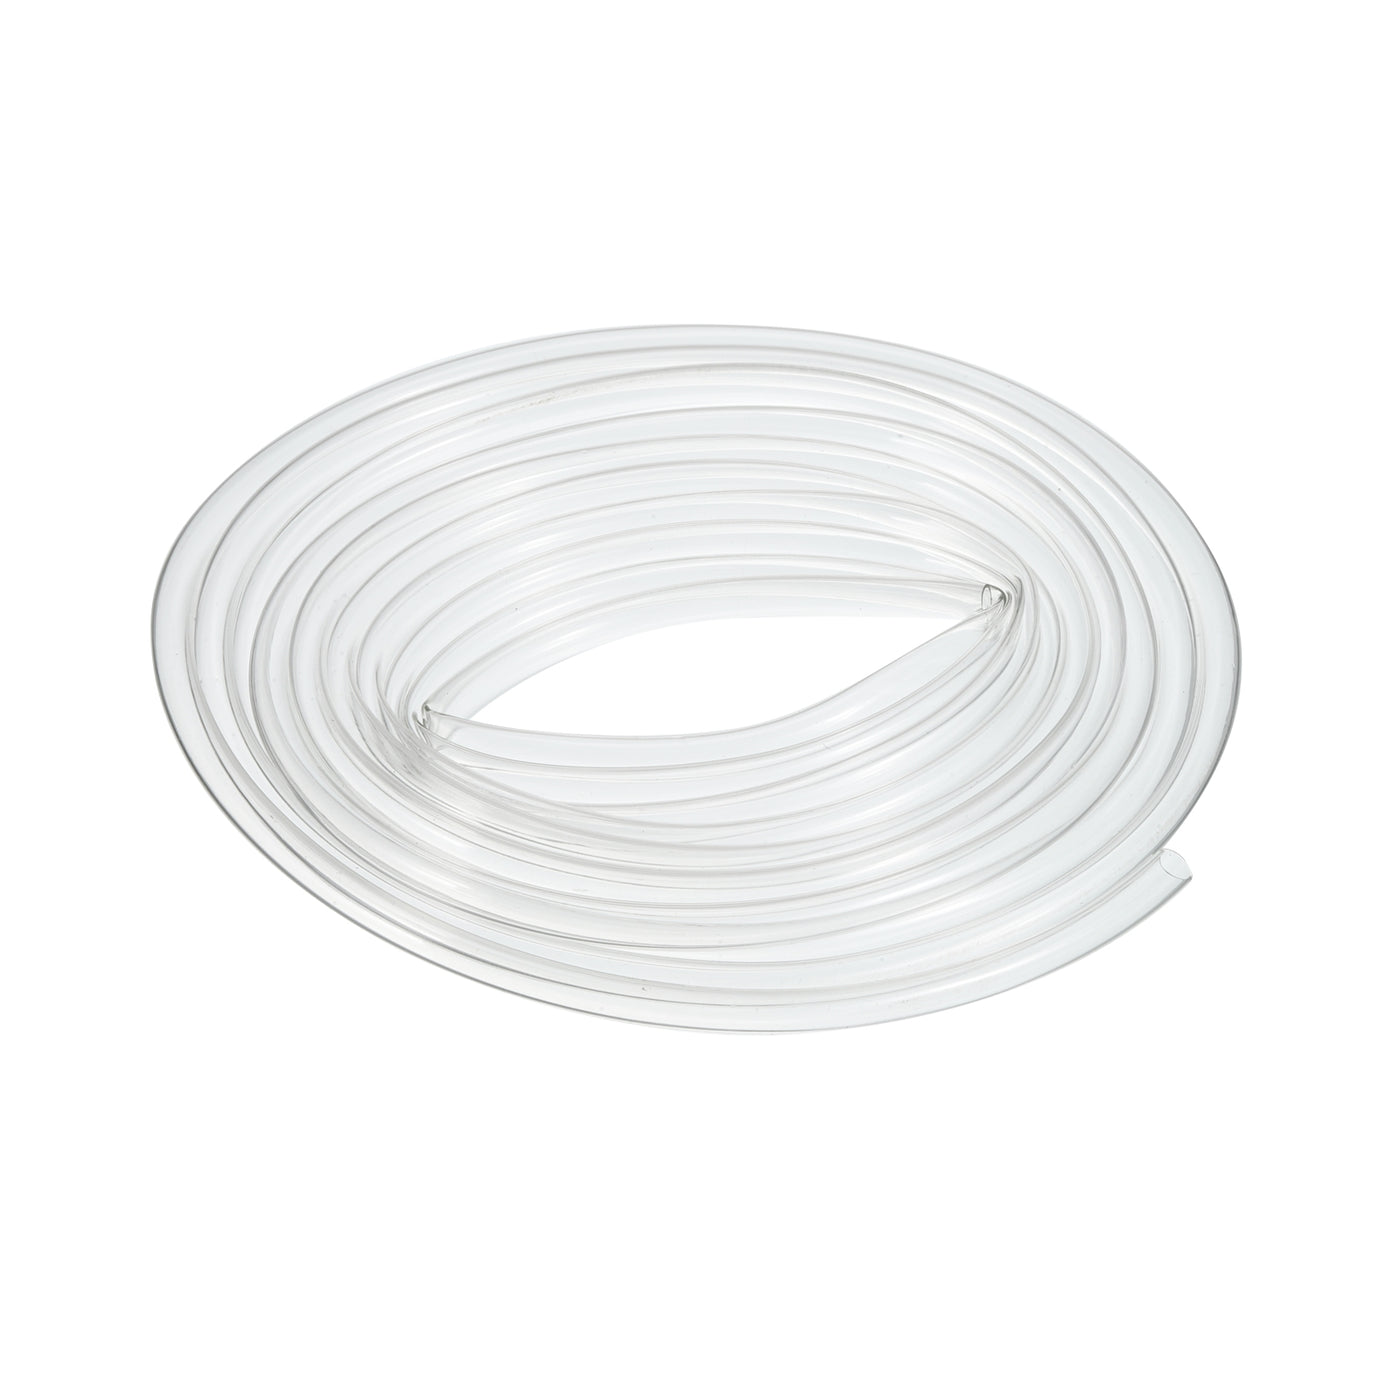 uxcell Uxcell Clear PVC Tube Wire Harness Tubing, 4mm ID 10ft Sleeve for Wire Sheathing Wire Protection